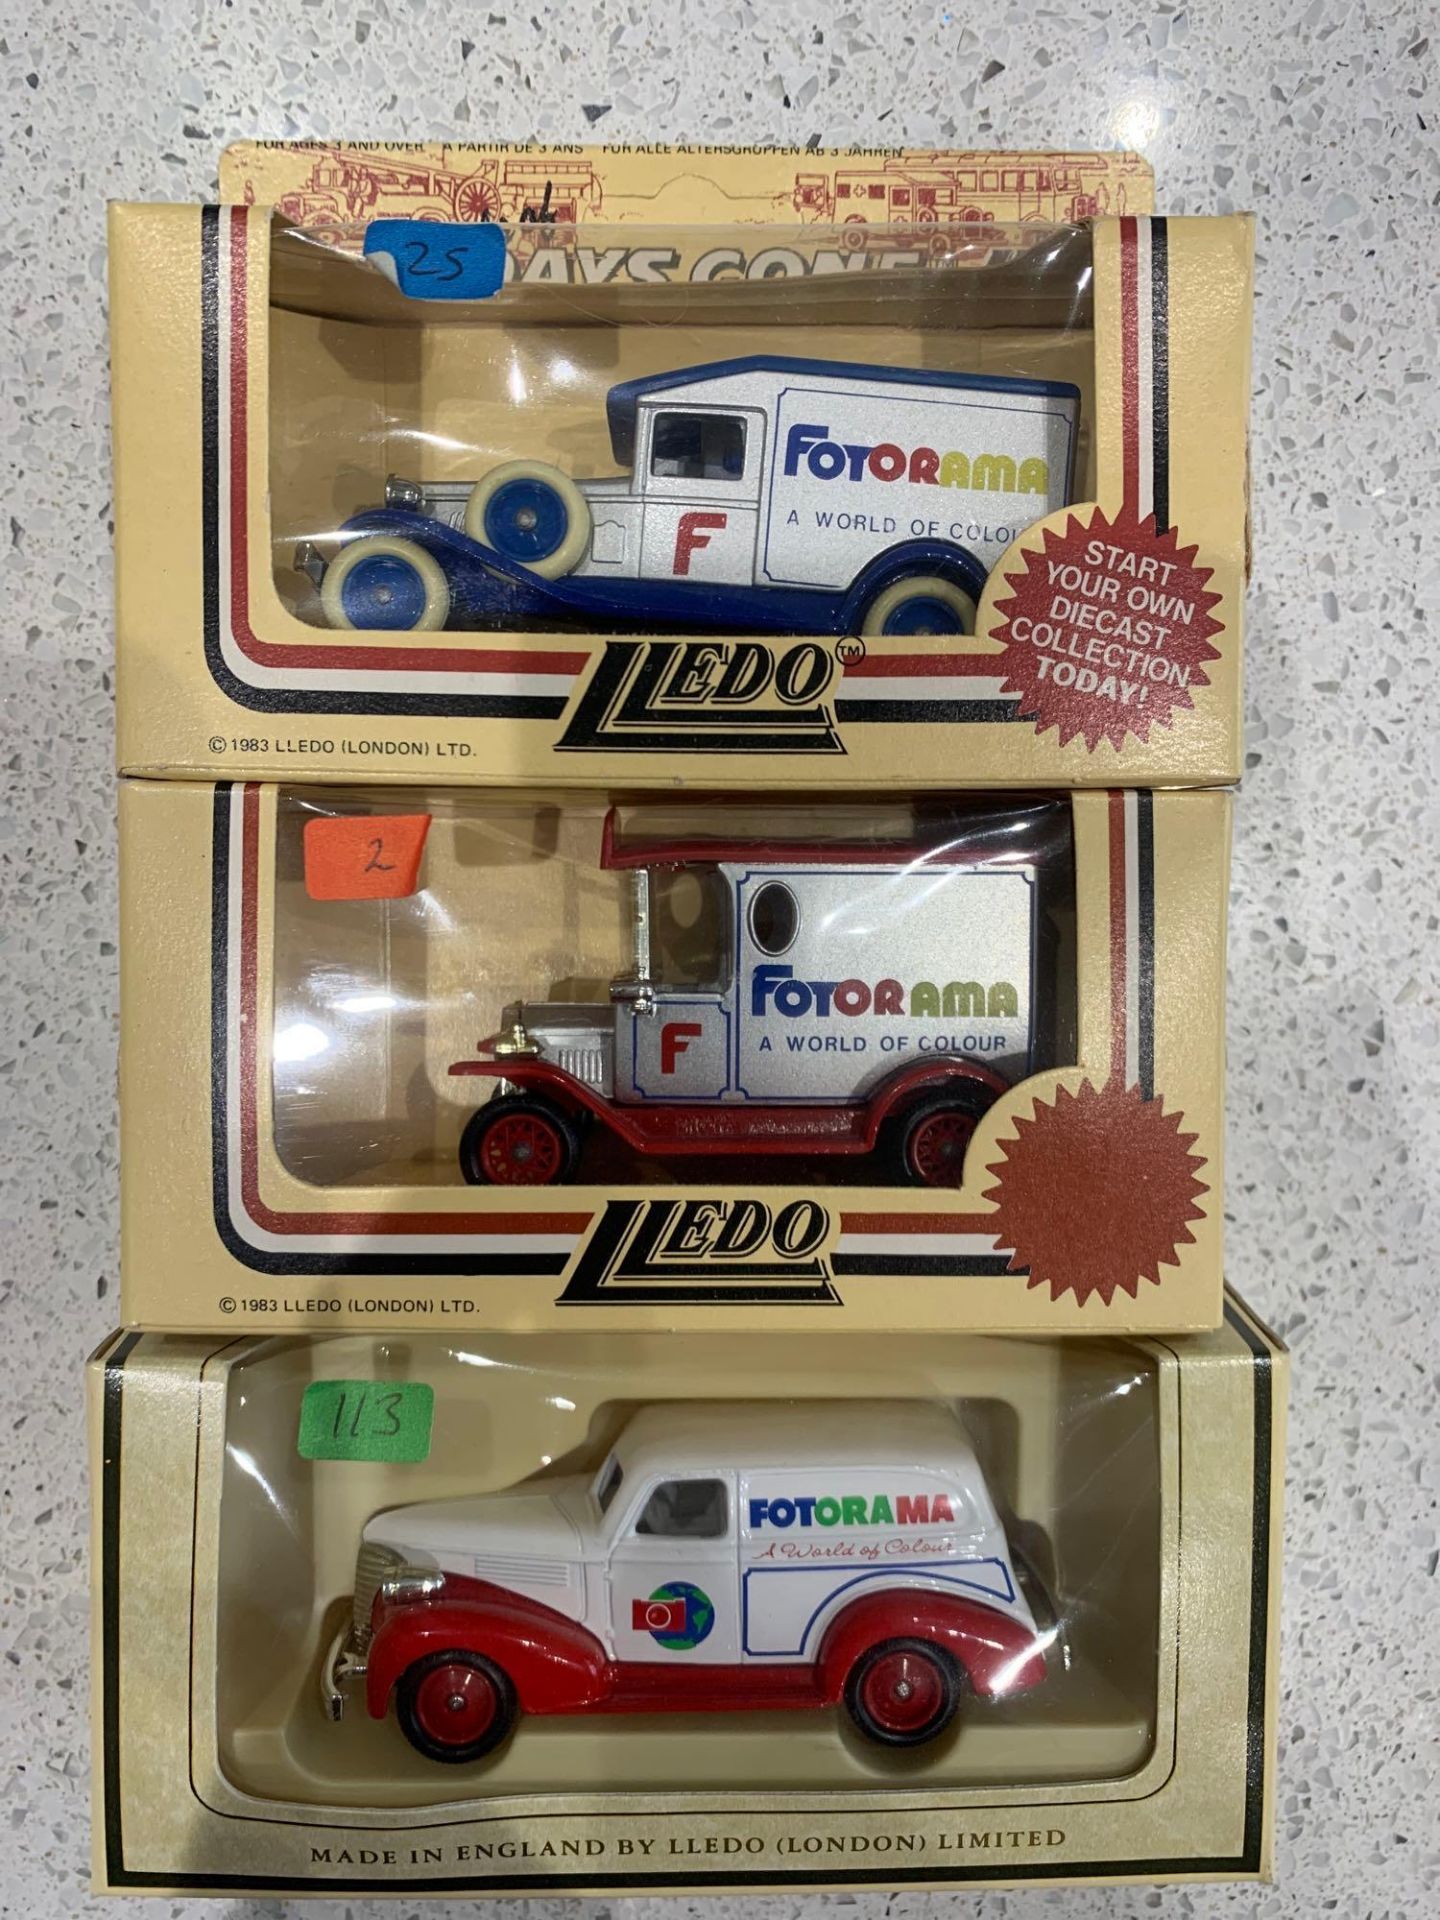 3 X Lledo Days Gone By Made In England Fotorama A World Of Colour Delivery Van 1/43 Scale - Image 2 of 5